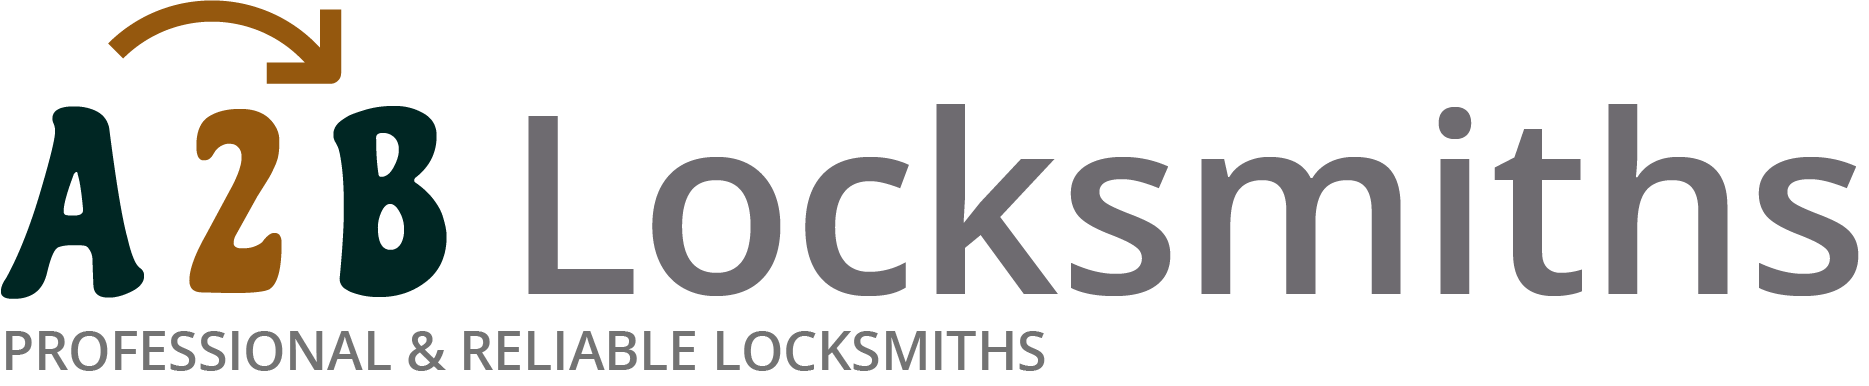 If you are locked out of house in Gillingham Dorset, our 24/7 local emergency locksmith services can help you.